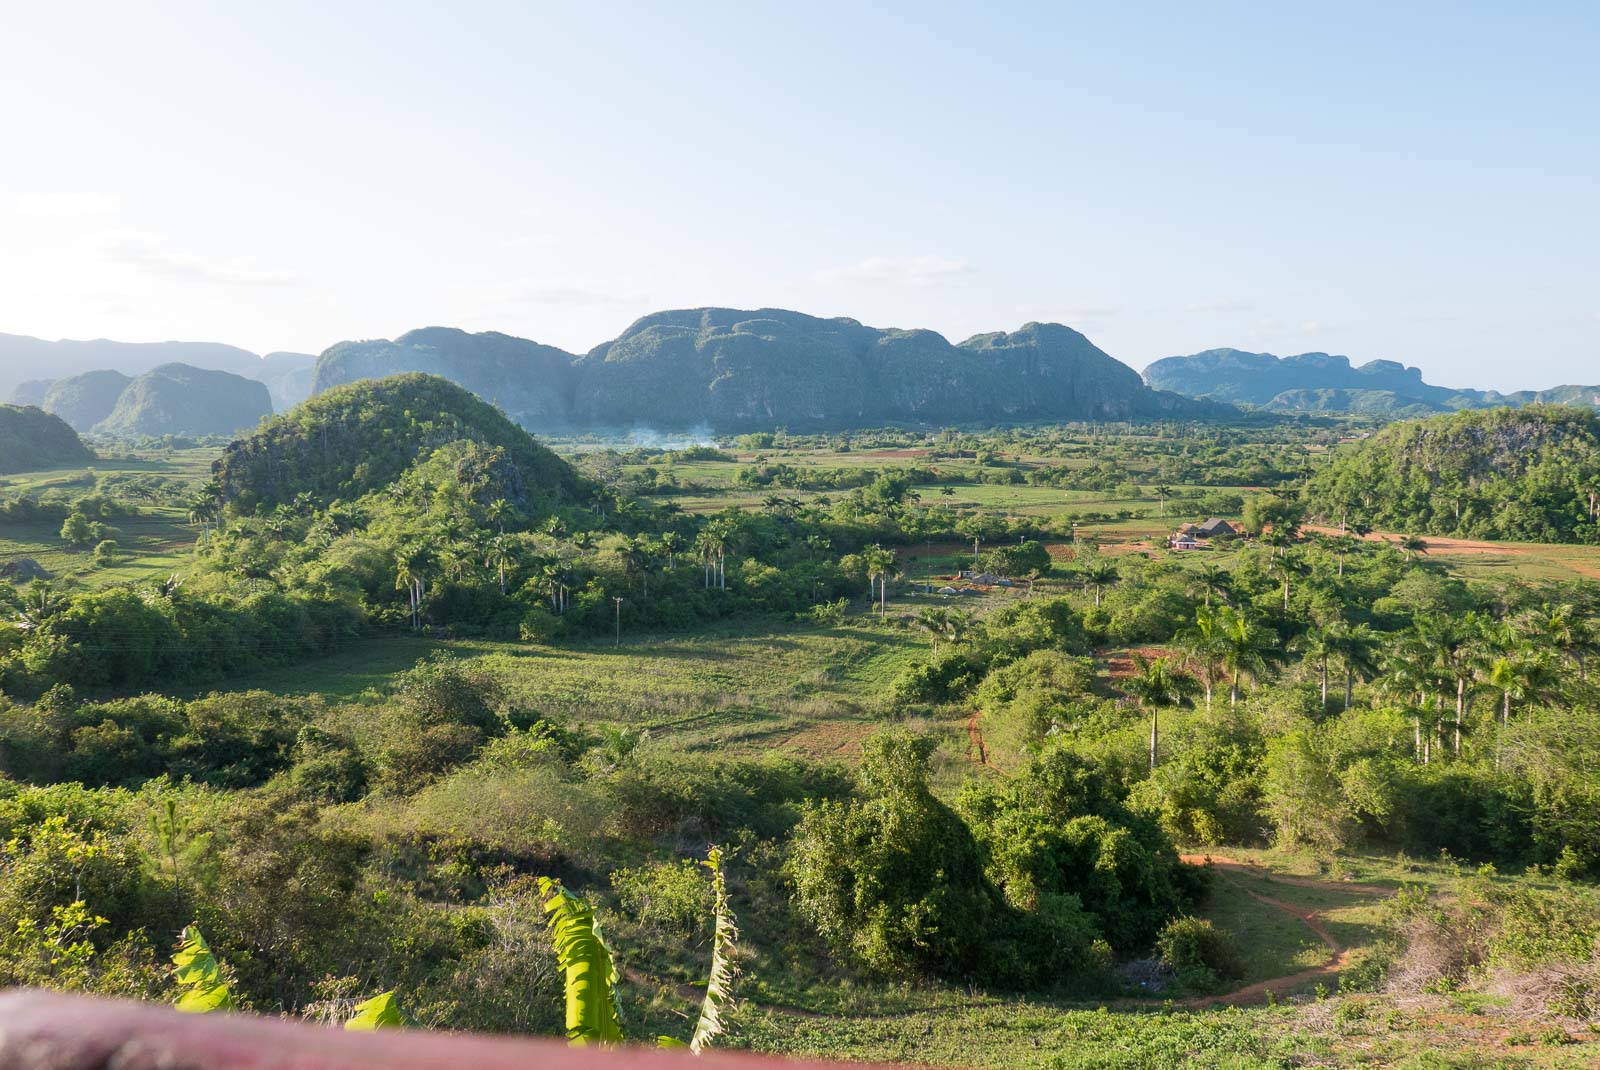 View over the mountain and valley in Vinales, Cuba.